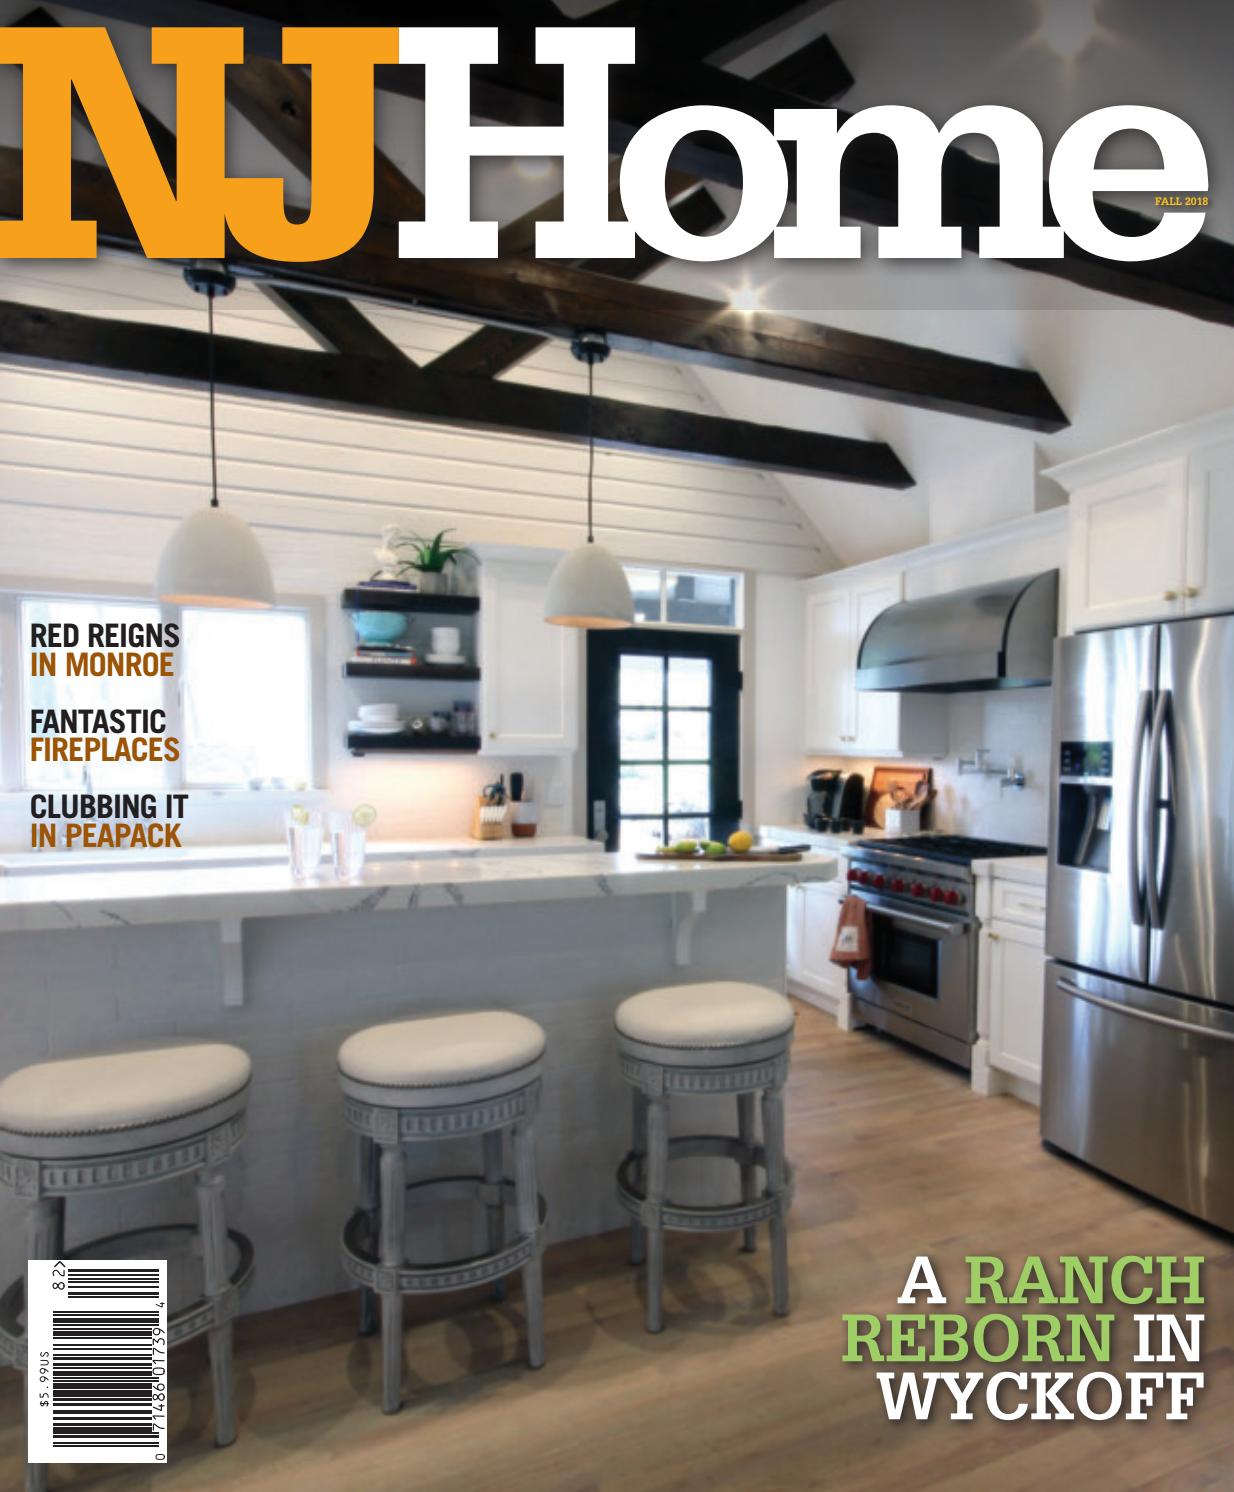 Callaway Grand Electric Fireplace Best Of Nj Home Fall 2018 by Wainscot Media issuu